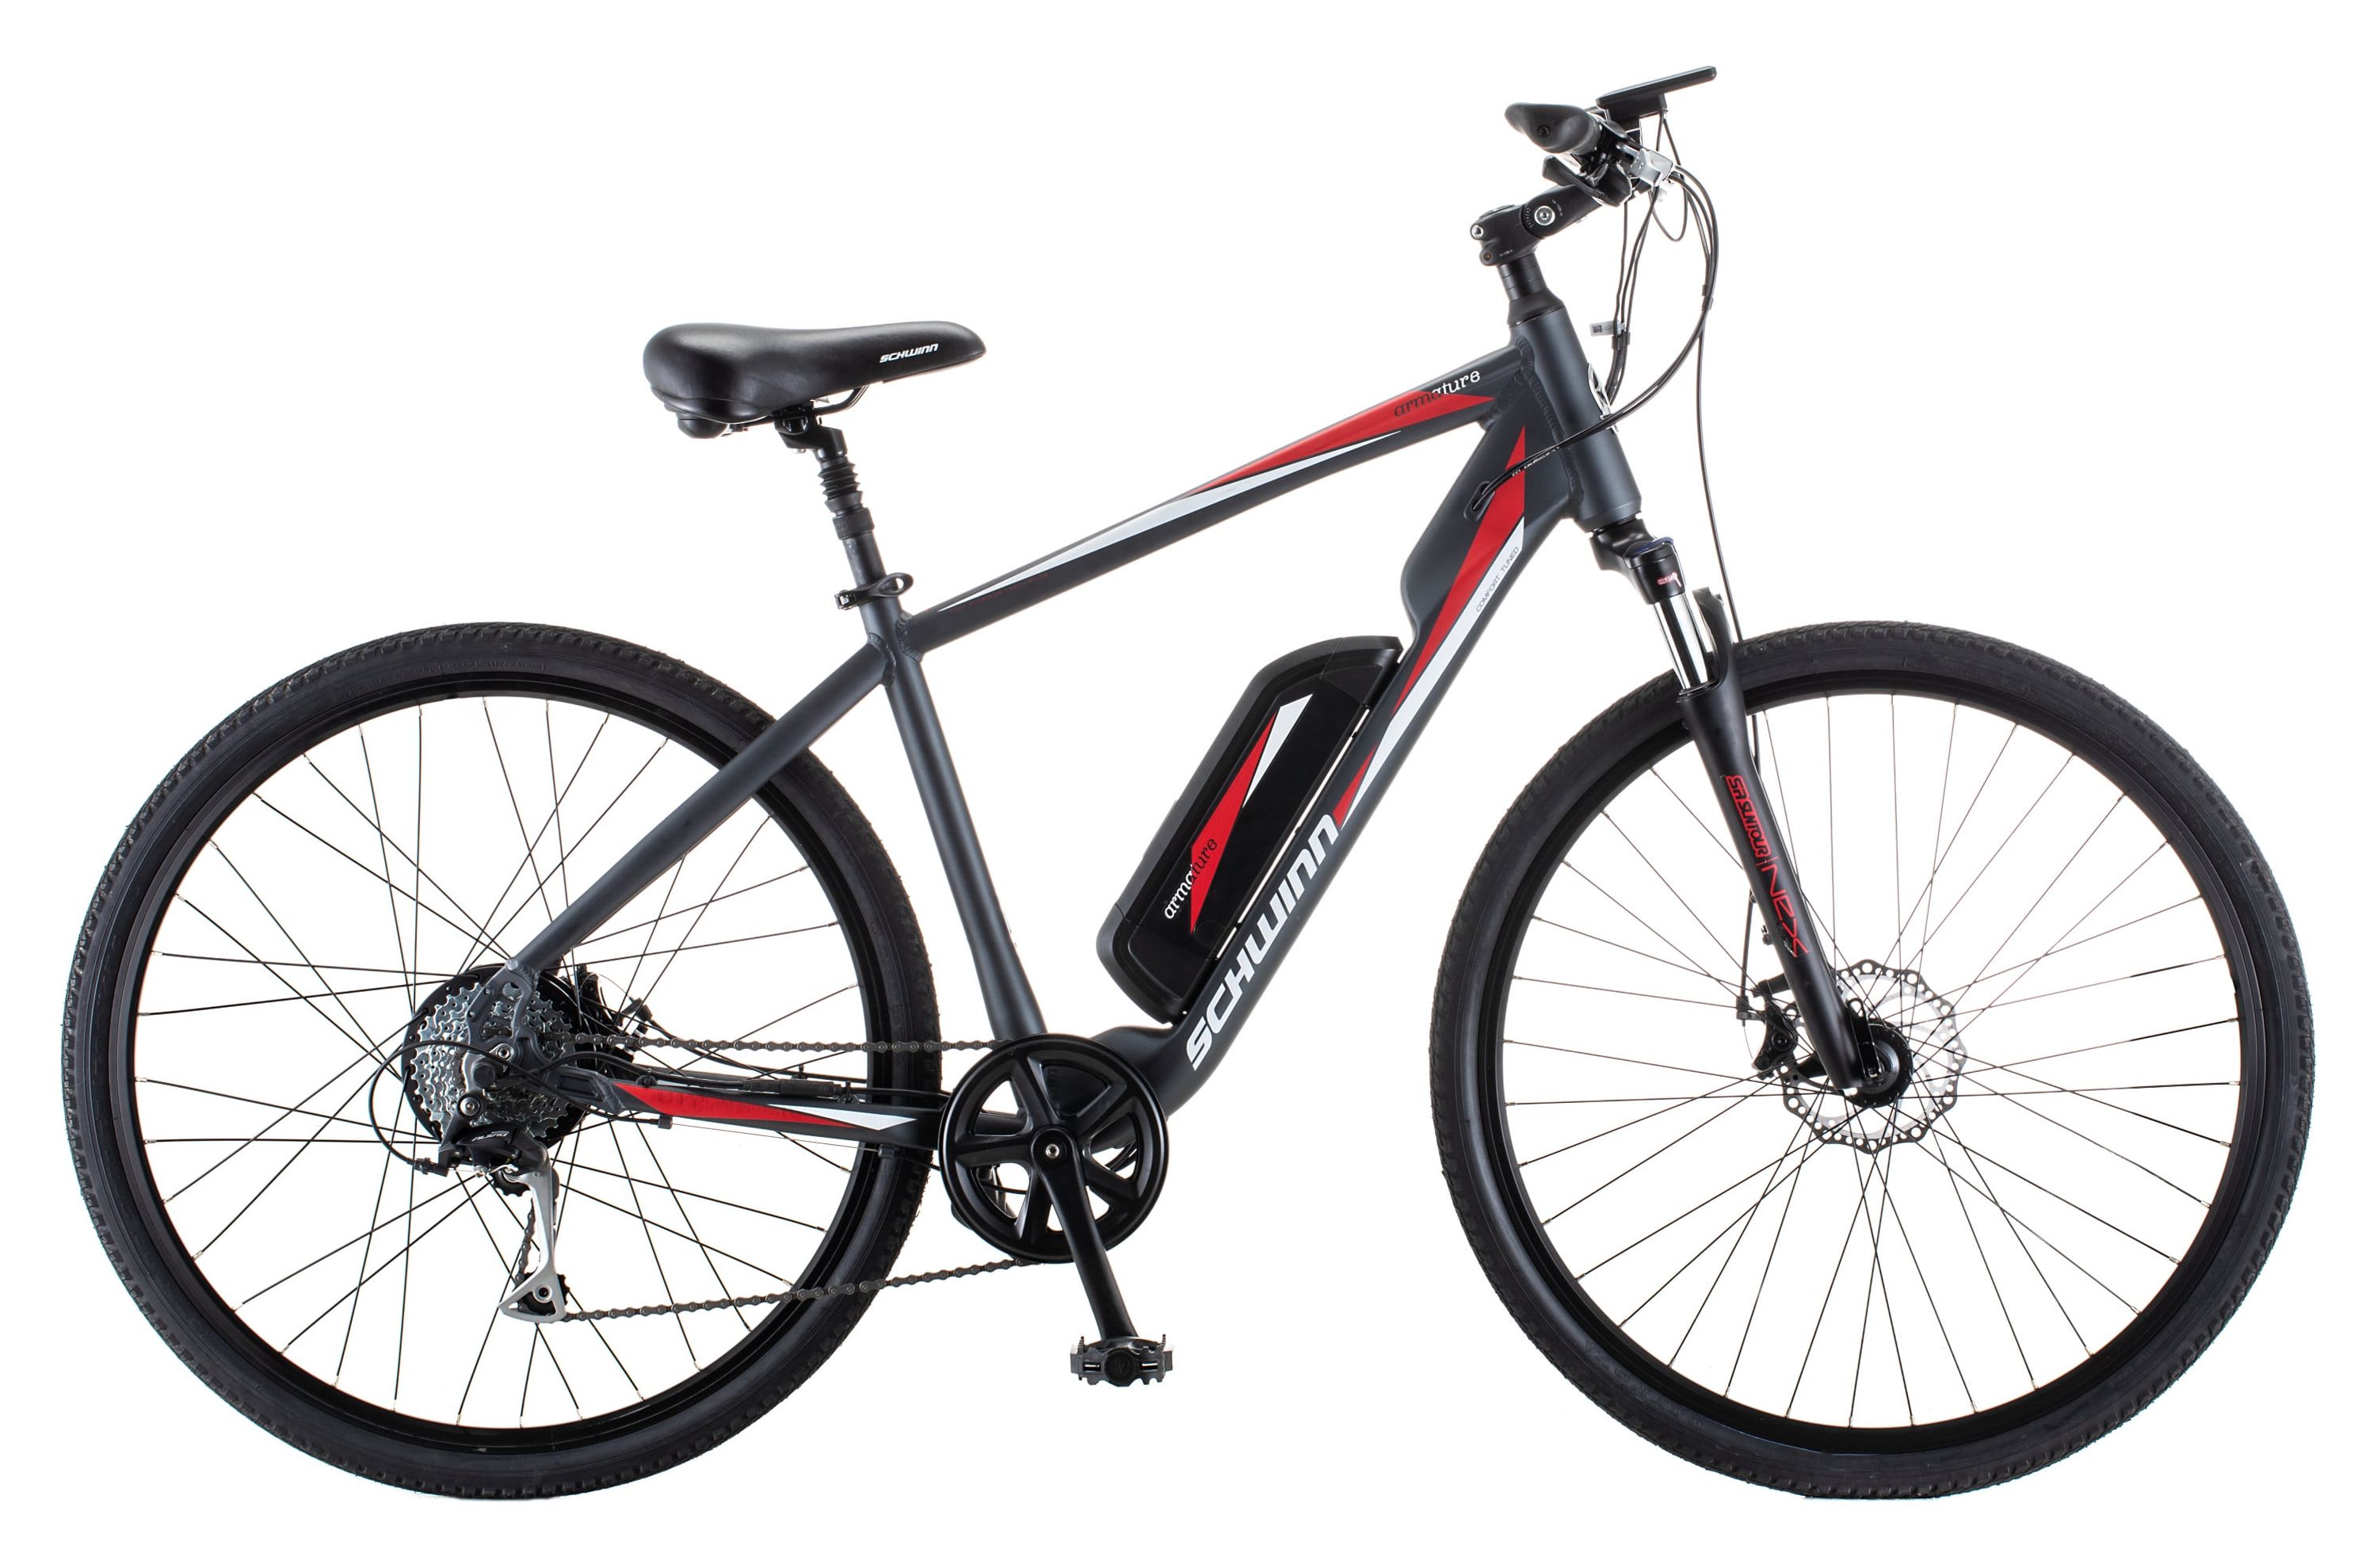 Schwinn 700c Armature Unisex Electric Bike, Black and Red Ebike for Adults, Large Frame - image 1 of 9